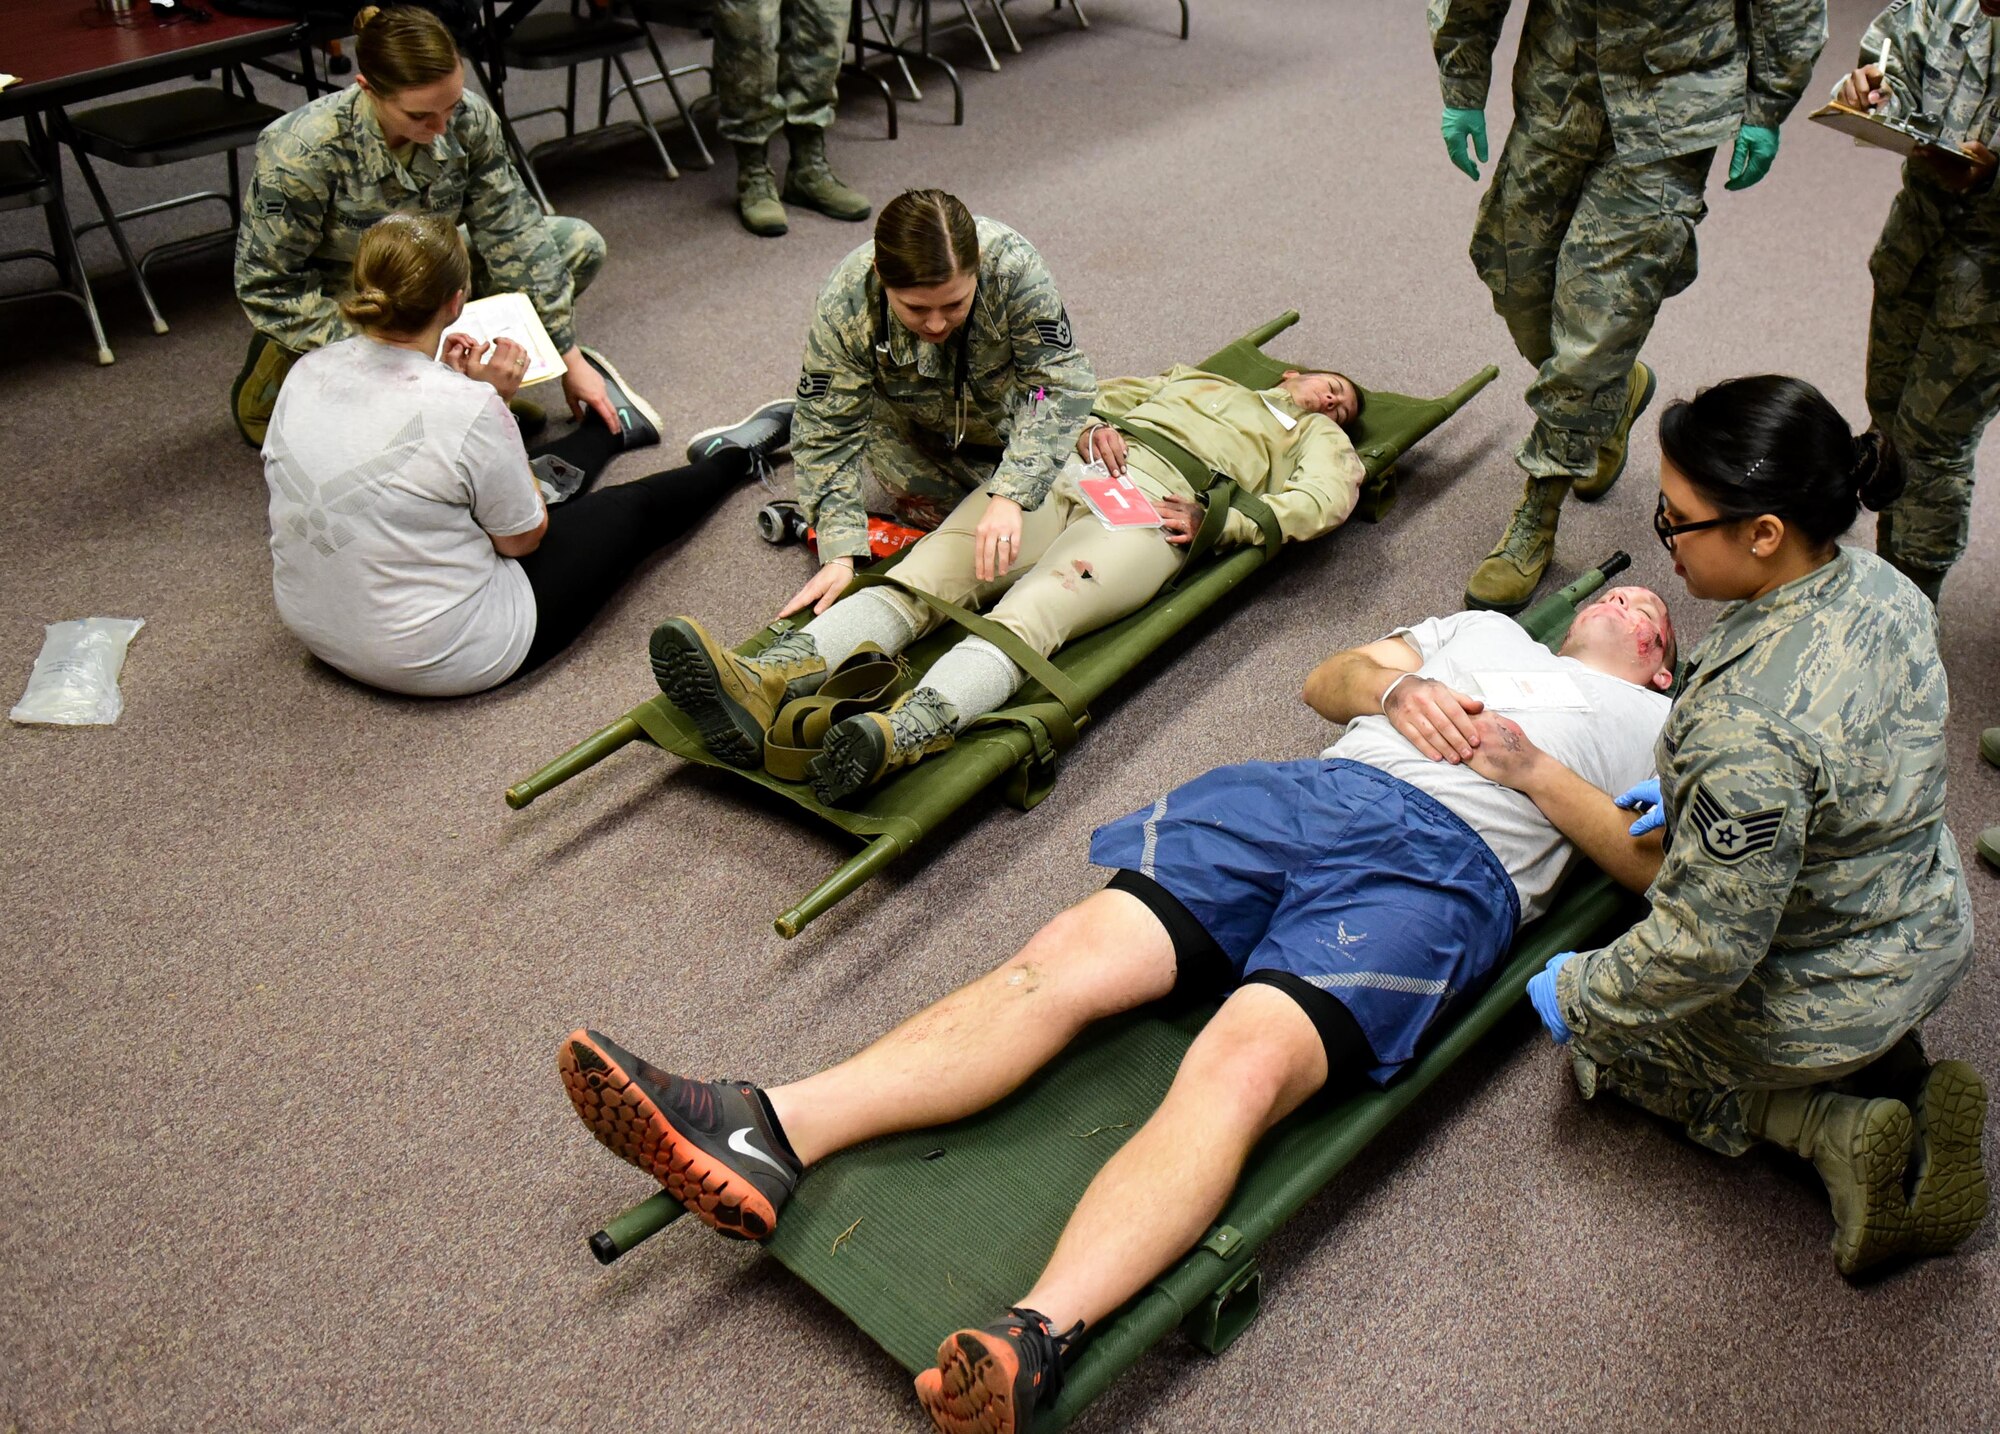 Members of the 4th Medical Group clinical team treat patients with simulated injuries during a mass casualty exercise Dec. 13, 2017, at Seymour Johnson Air Force Base, North Carolina.